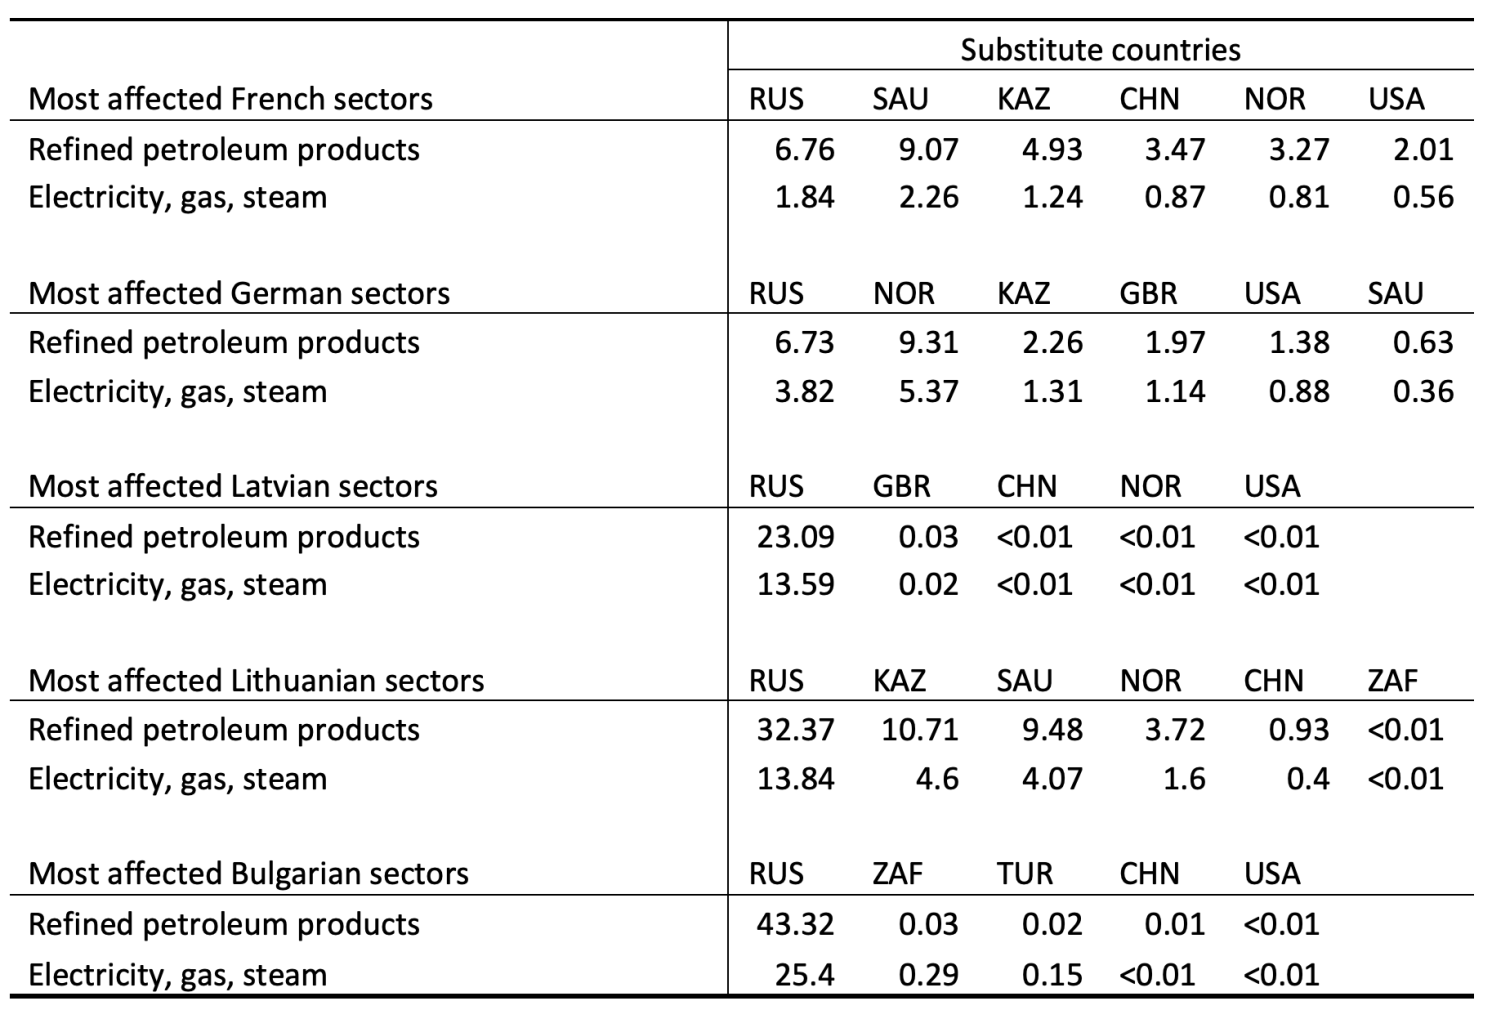 Table 2 Substitute markets for European countries (in %)